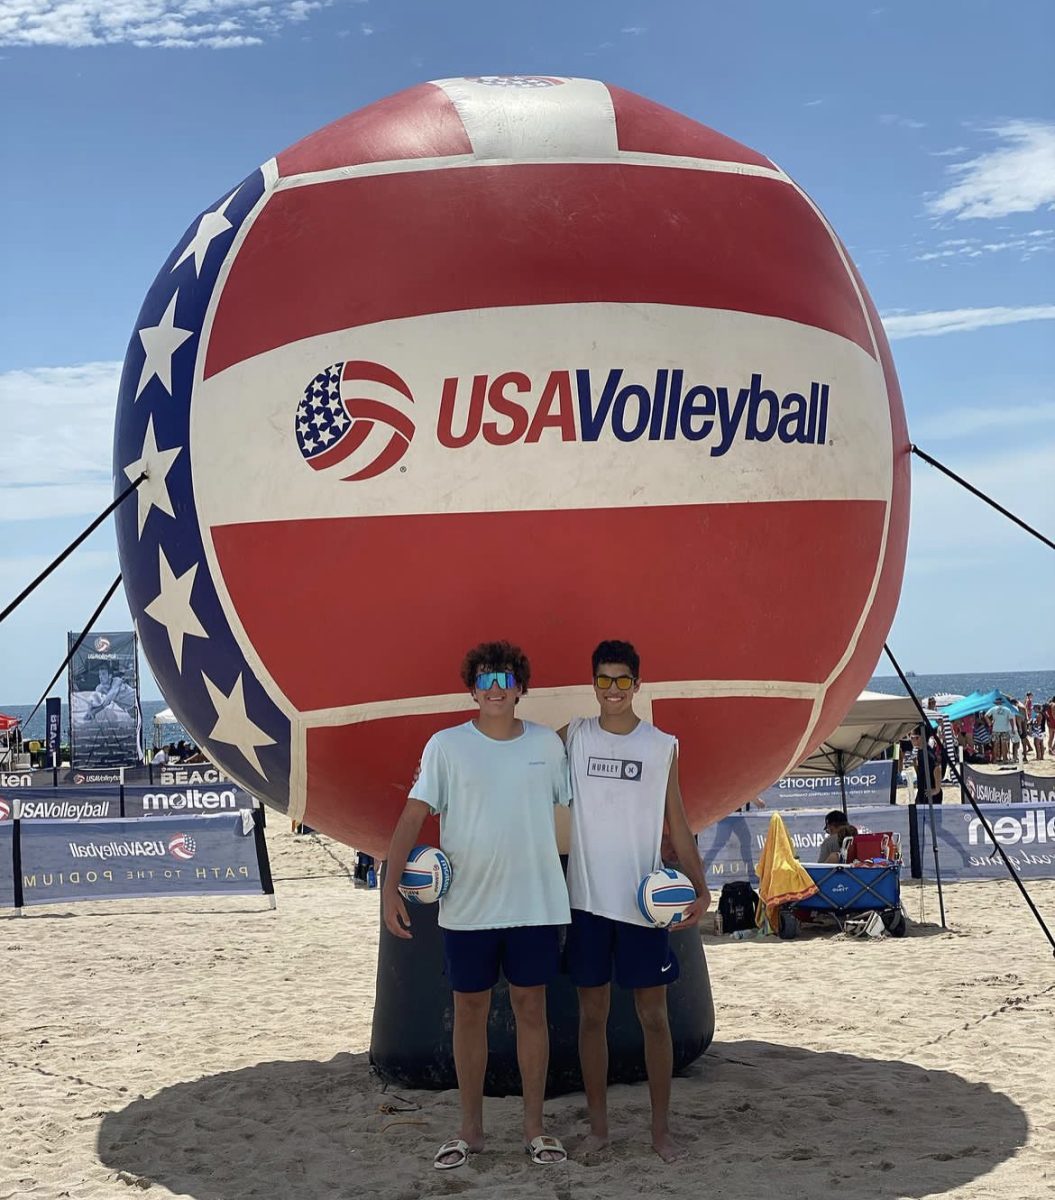 National Duo Juniors Charlie Gordy and Maddox Canham pose at the USA Volleyball Championship, after a top 10 national finish.